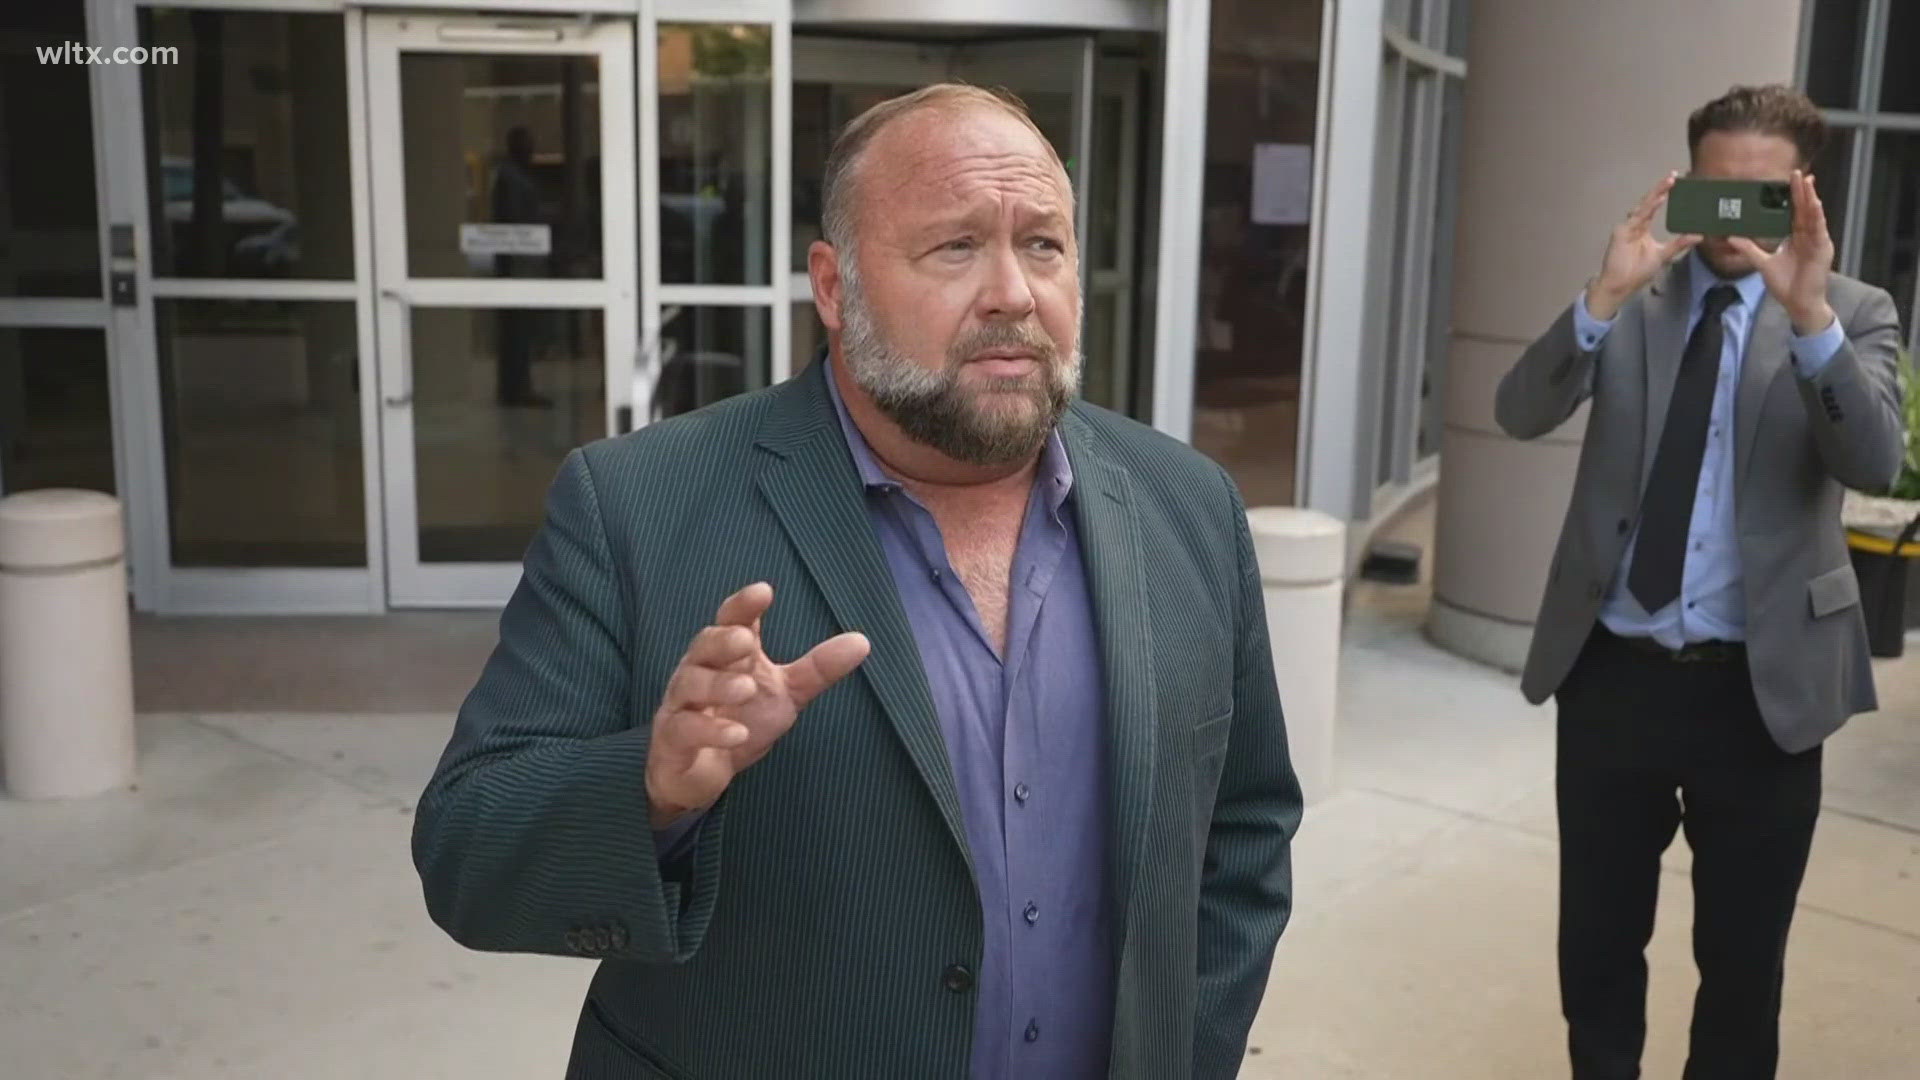 Alex Jones owes $1.5 billion for his false claims that the Sandy Hook Elementary School shooting was a hoax.